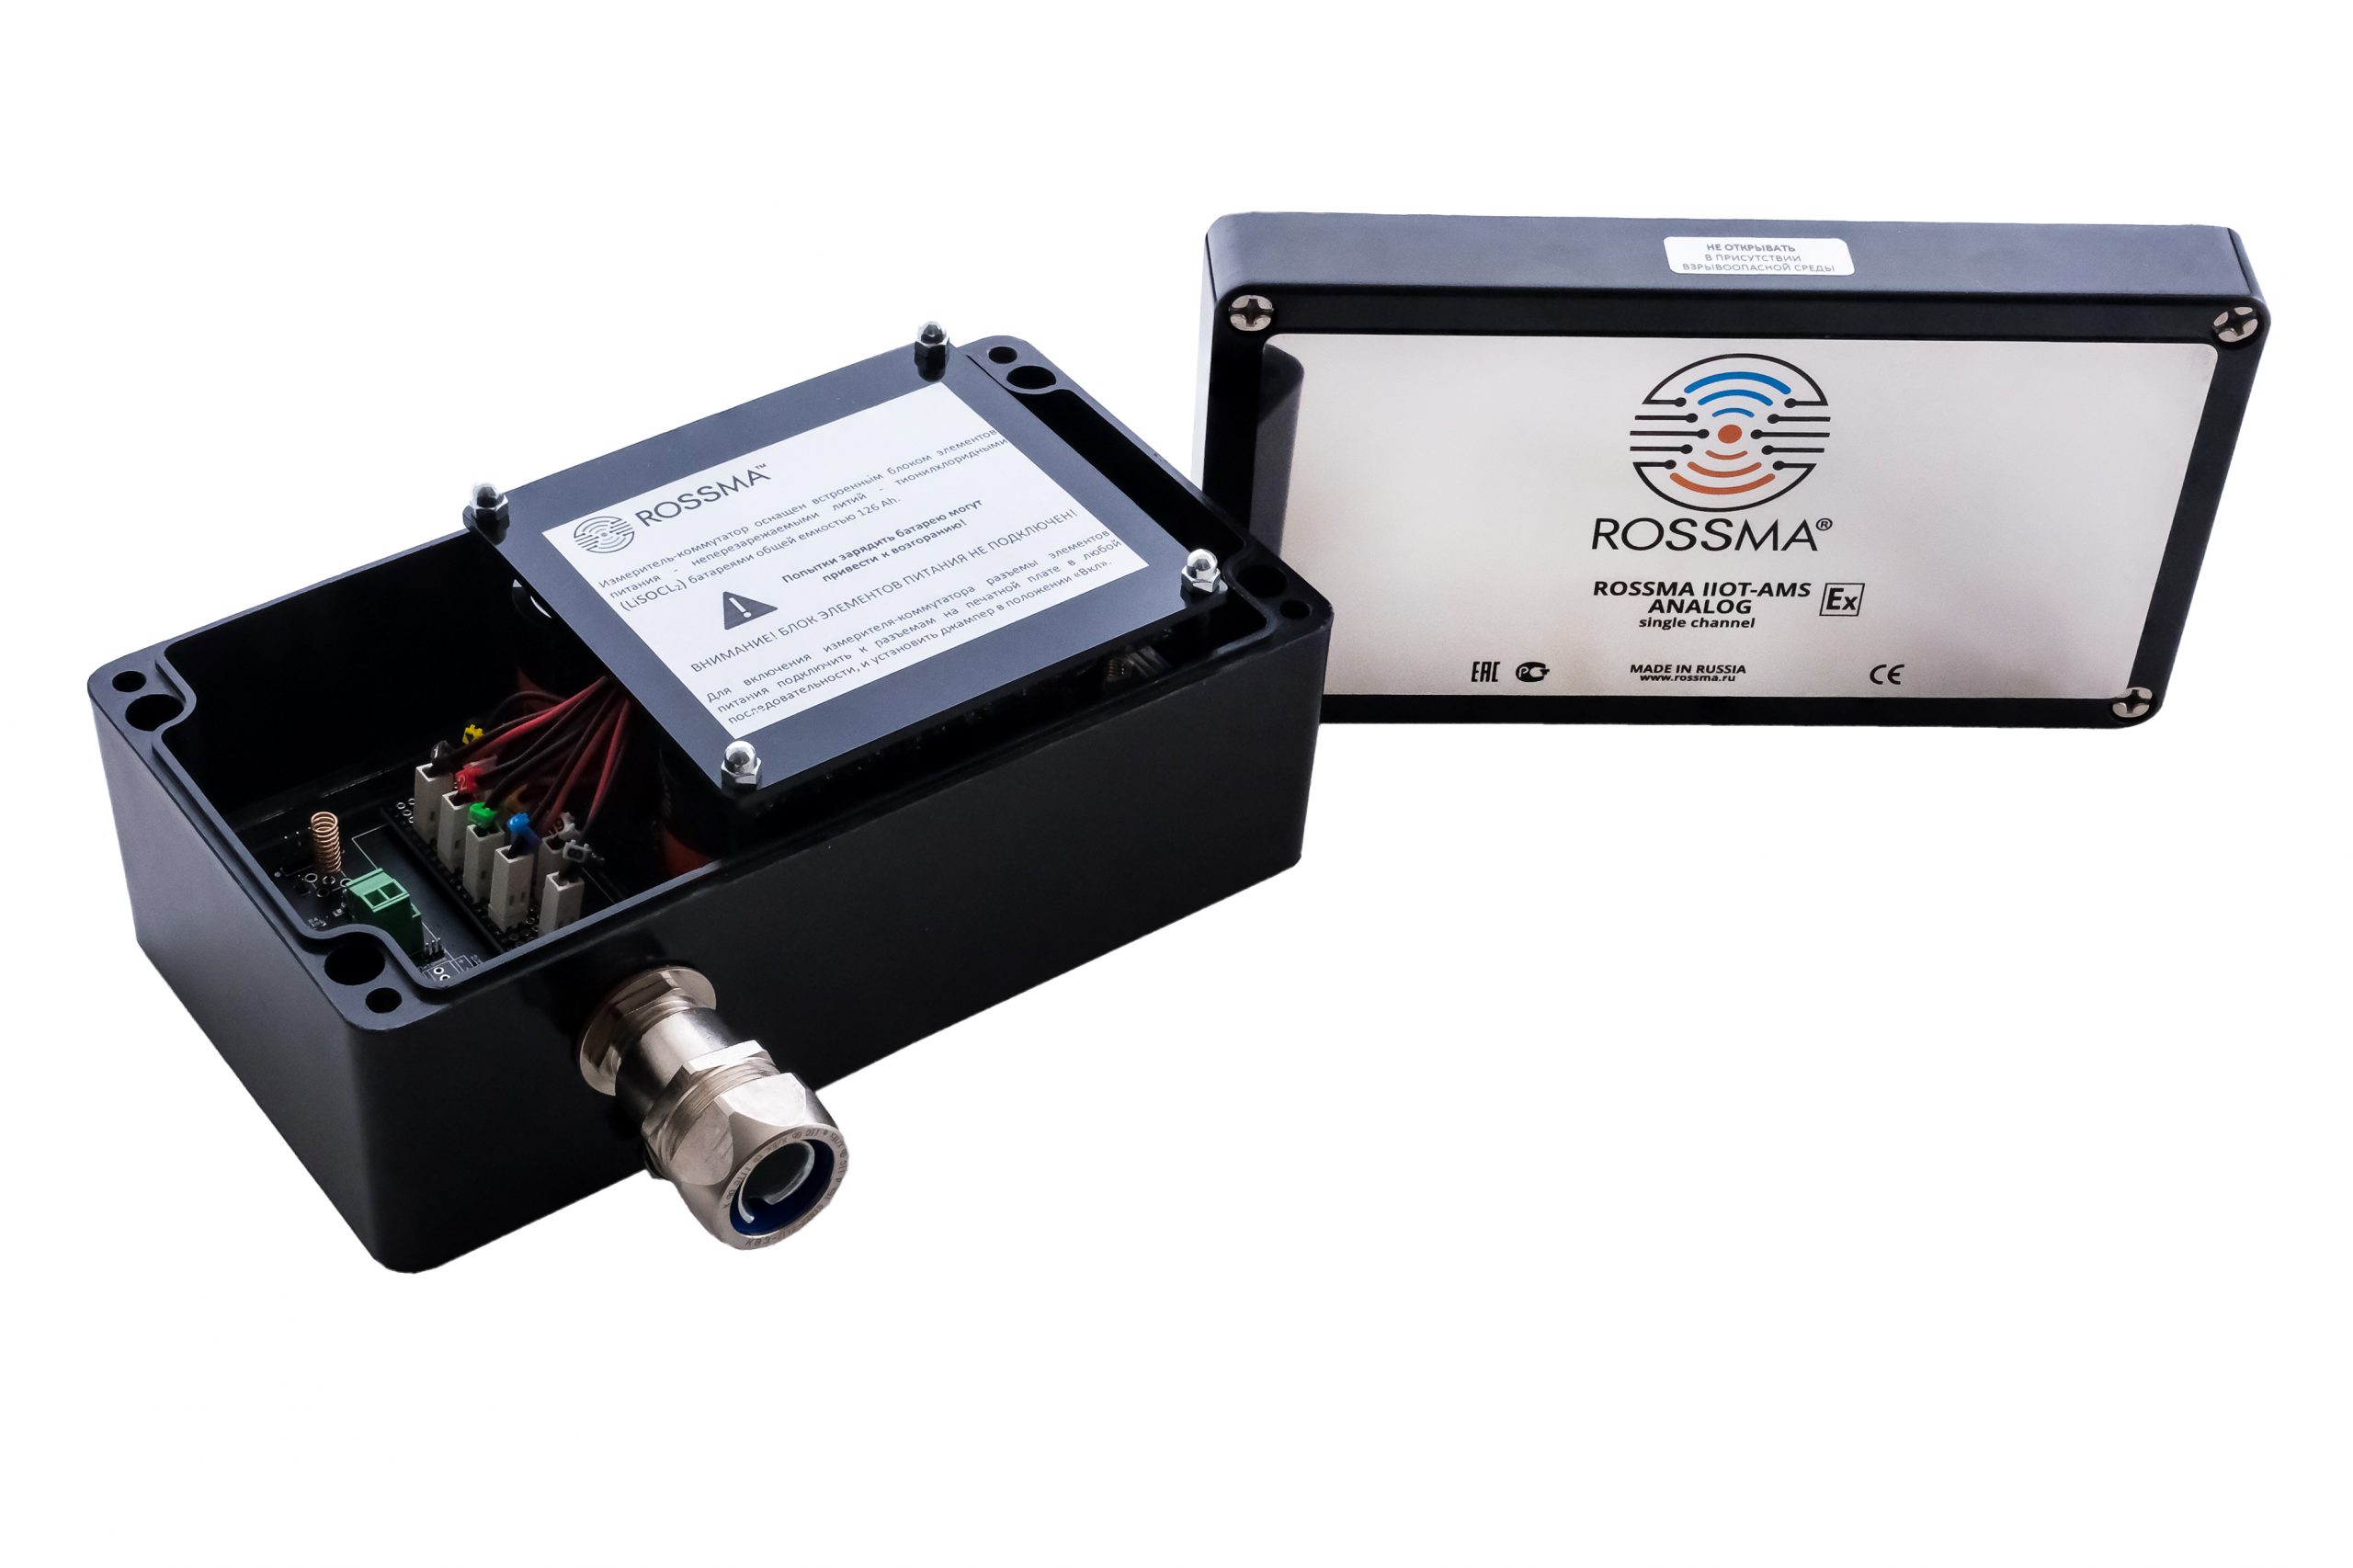 New switching device in ROSSMA ® IIOT-AMS line